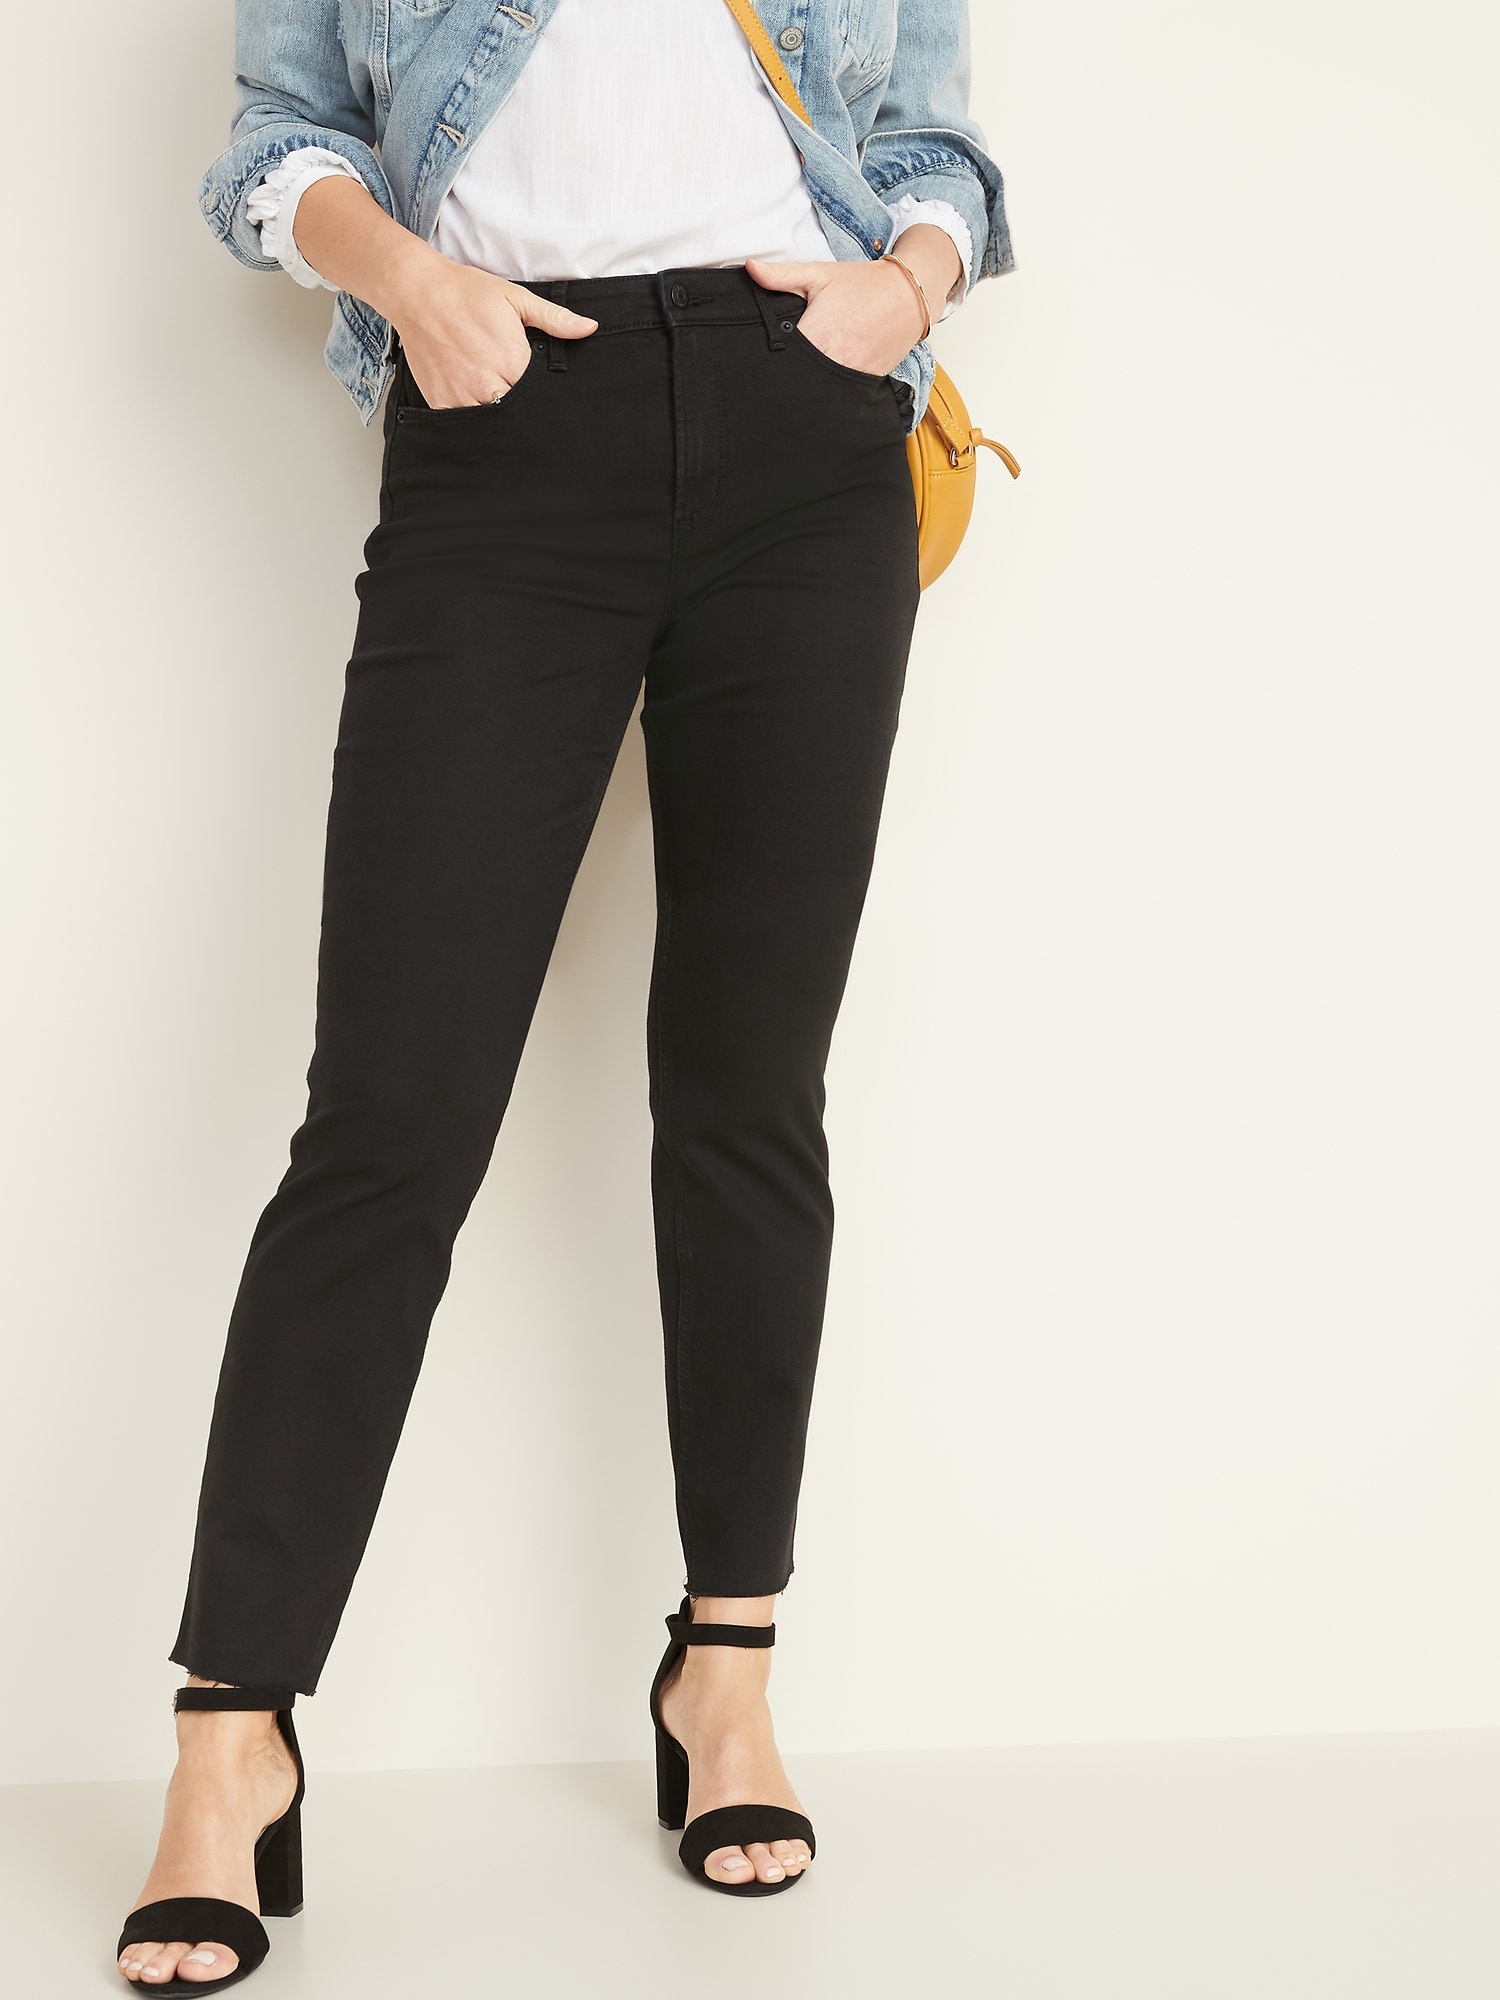 old navy high rise power jean